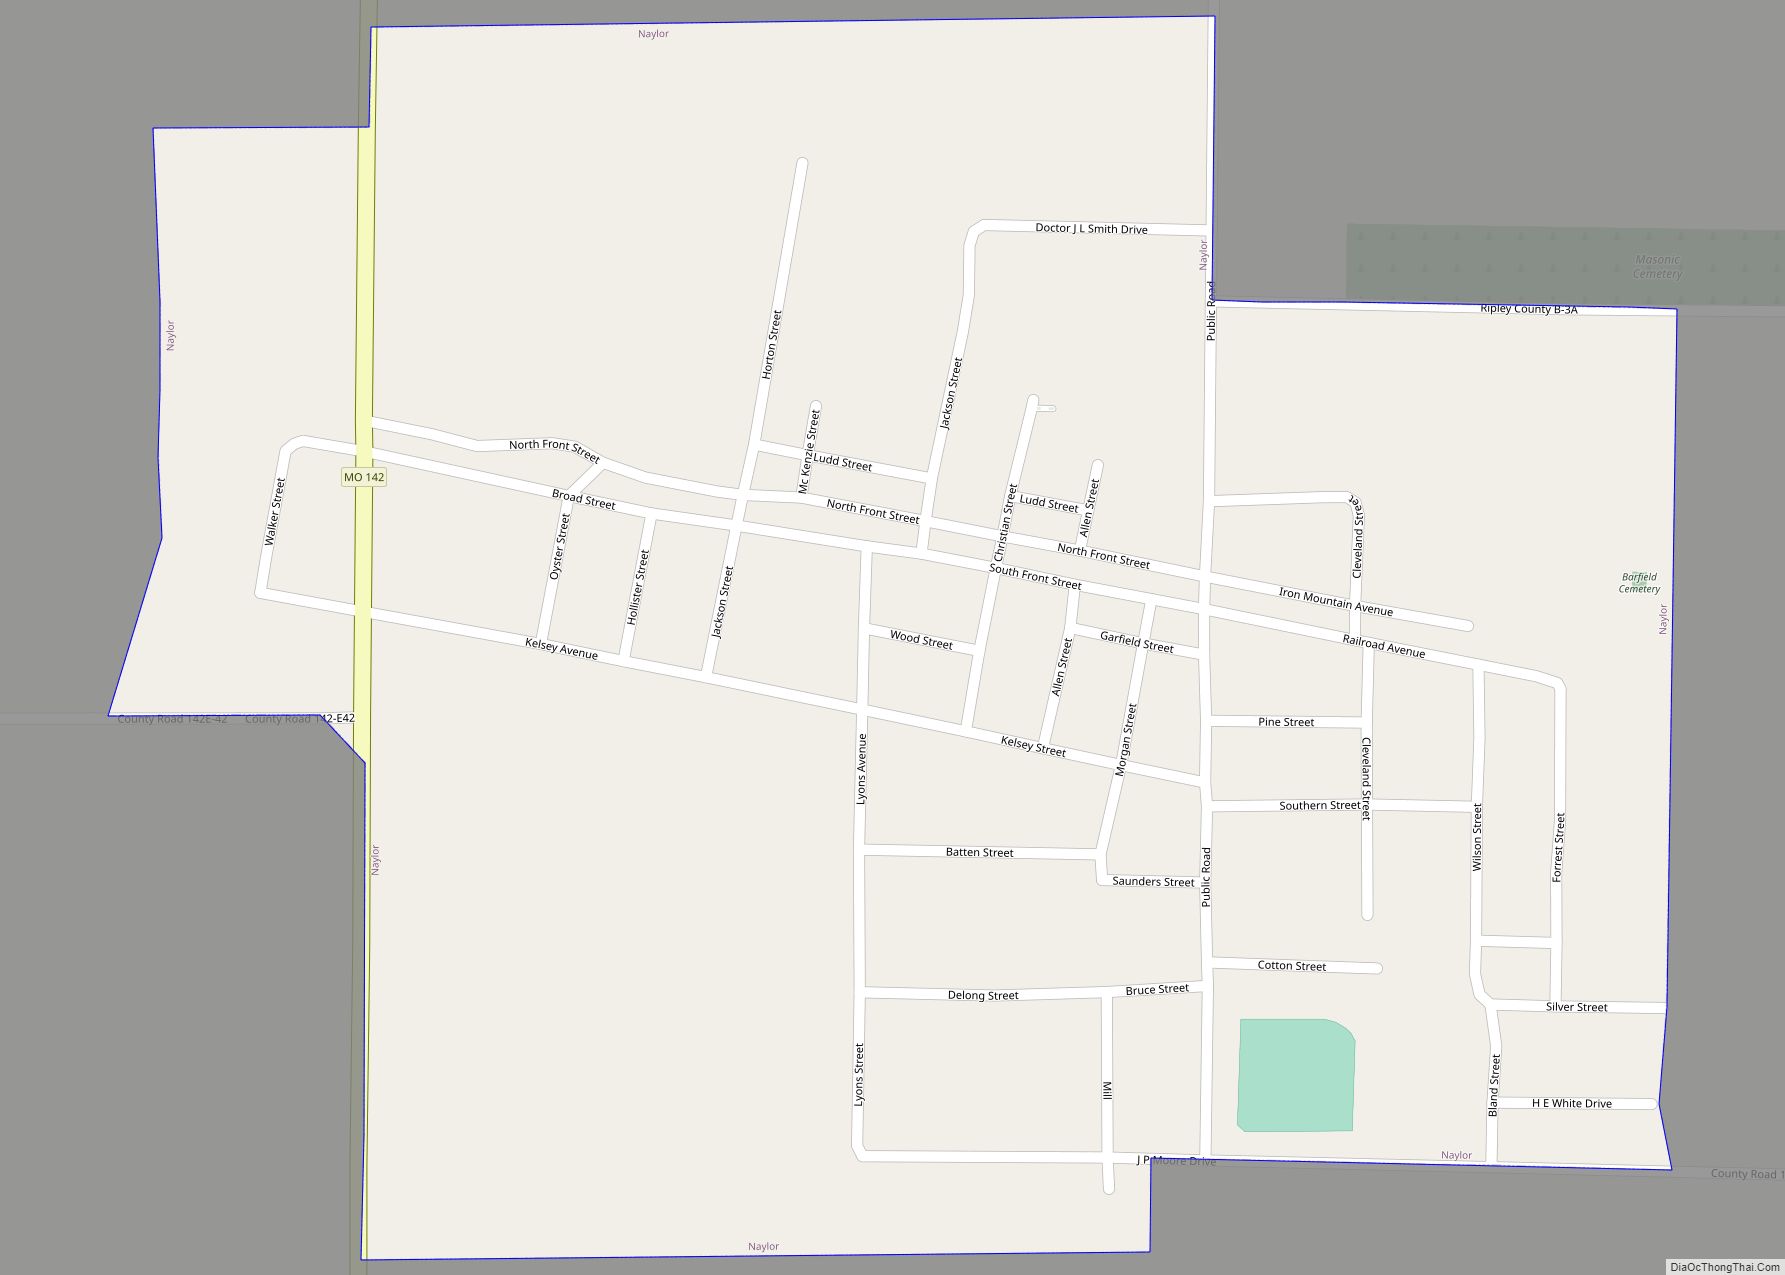 Map of Naylor city